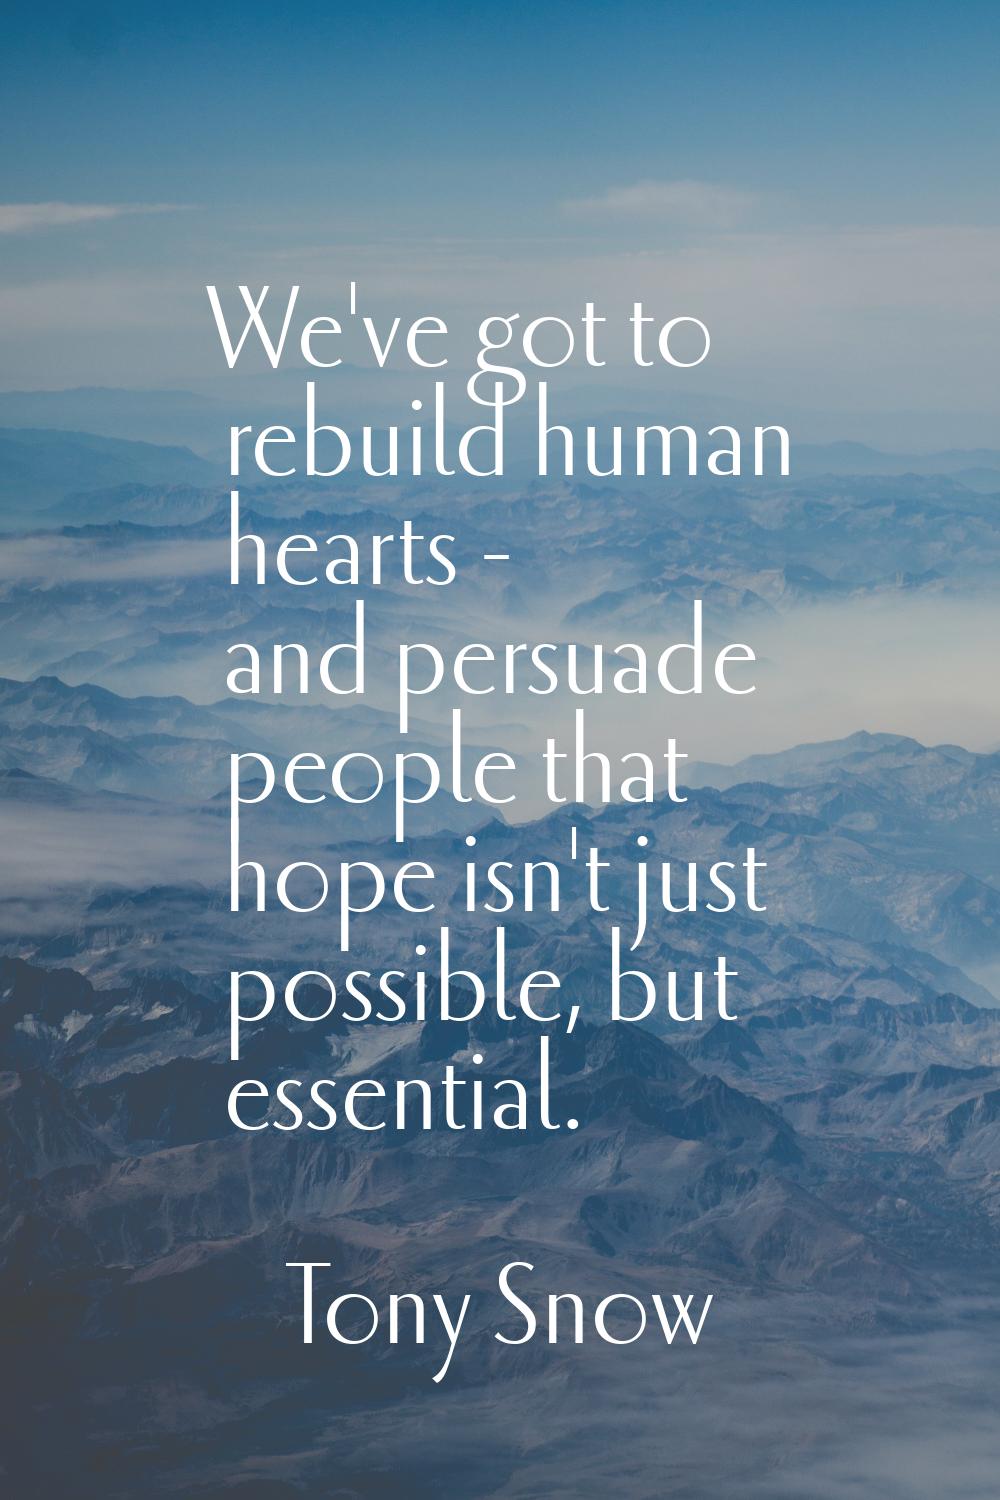 We've got to rebuild human hearts - and persuade people that hope isn't just possible, but essentia